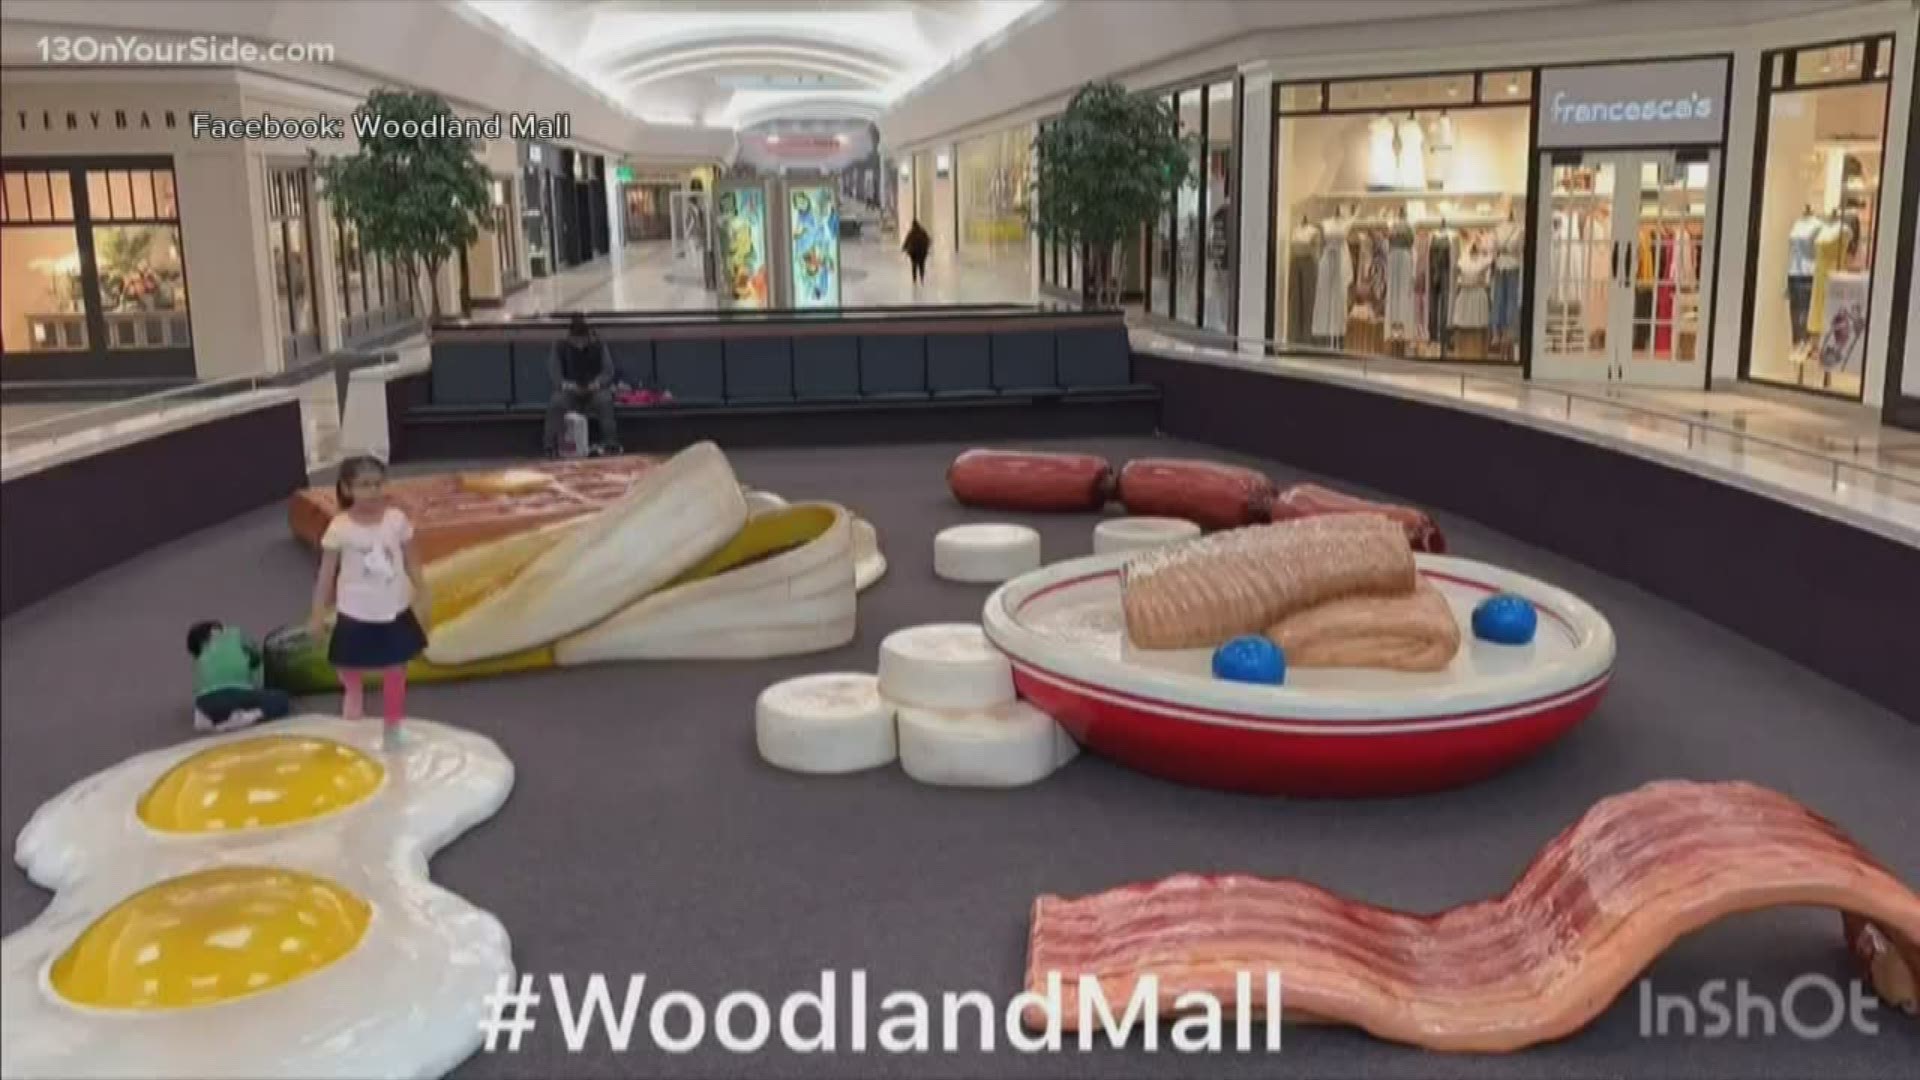 Woodland Mall is giving the community a chance to bring home the bacon and eggs, two central pieces of its iconic play area that were retired earlier this year.